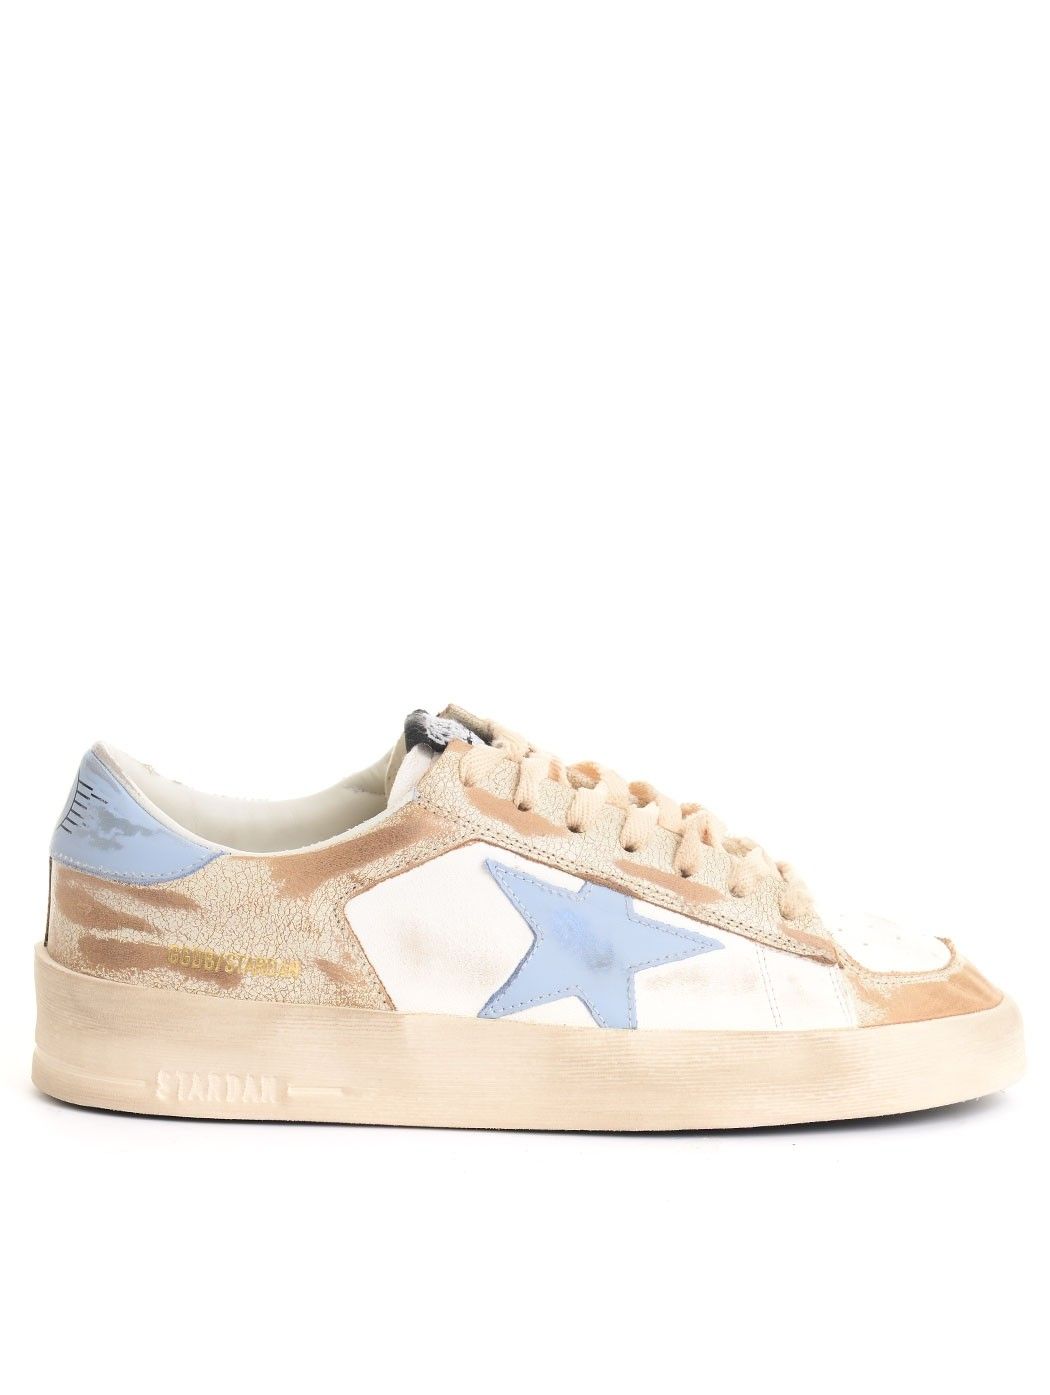  MAN SHOES,SPRING SUMMER SHOES,CHURCH'S SHOES,DIADORA HERITAGE SHOES,DIADORA HERITAGE SNEAKERS,GOLDEN GOOSE SHOES,GOLDEN GOOSE SNEAKERS  GOLDEN GOOSE GMF00333